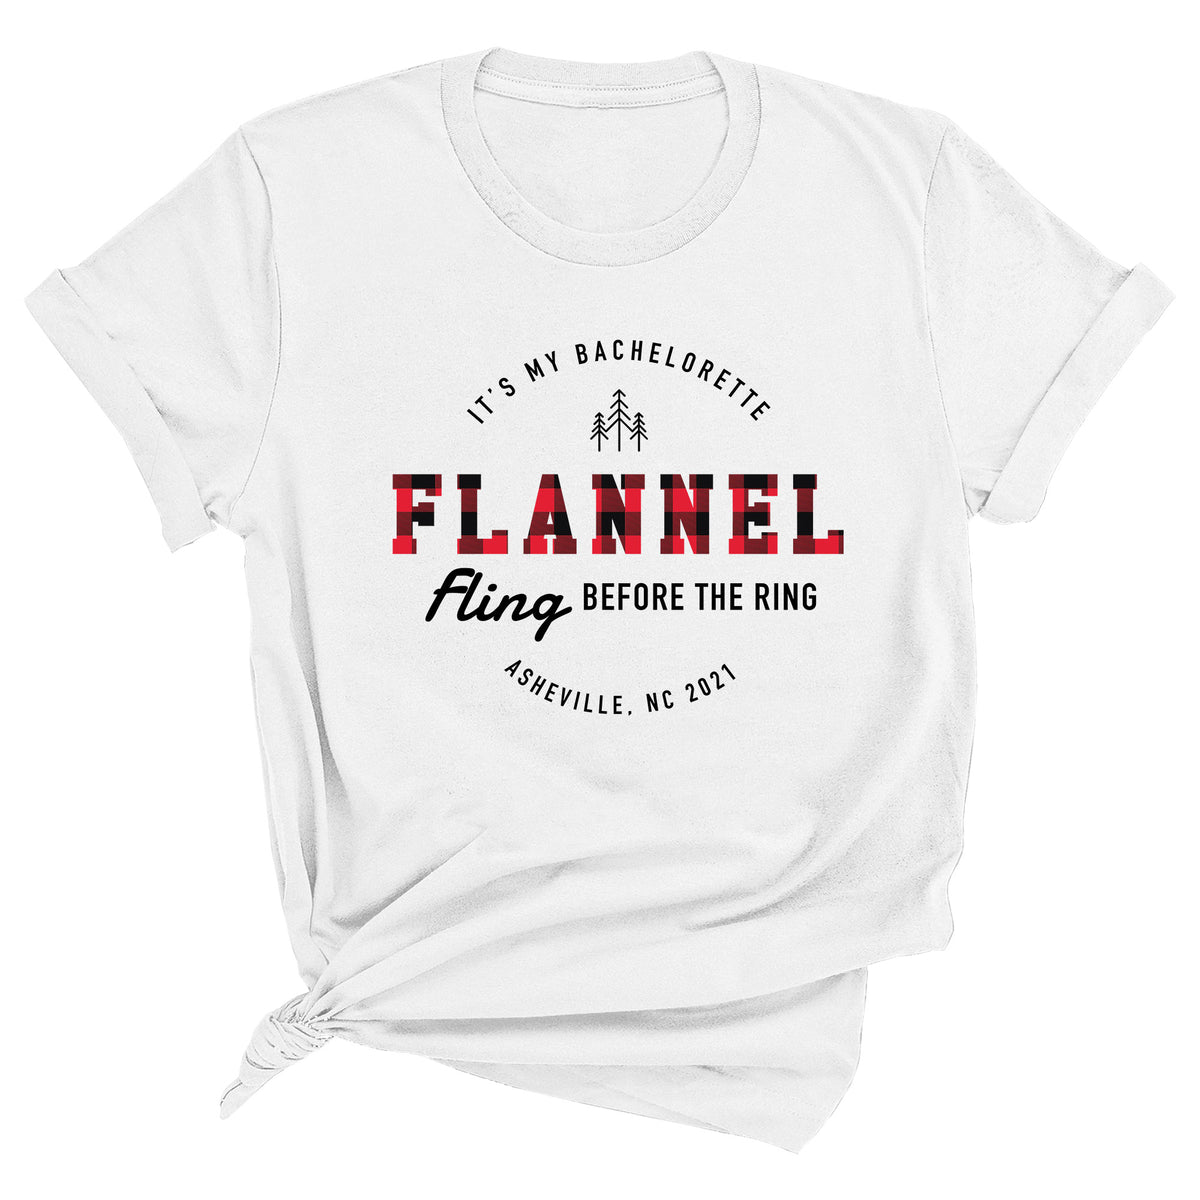 Flannel Fling Before the Ring with Custom Unisex T-Shirt